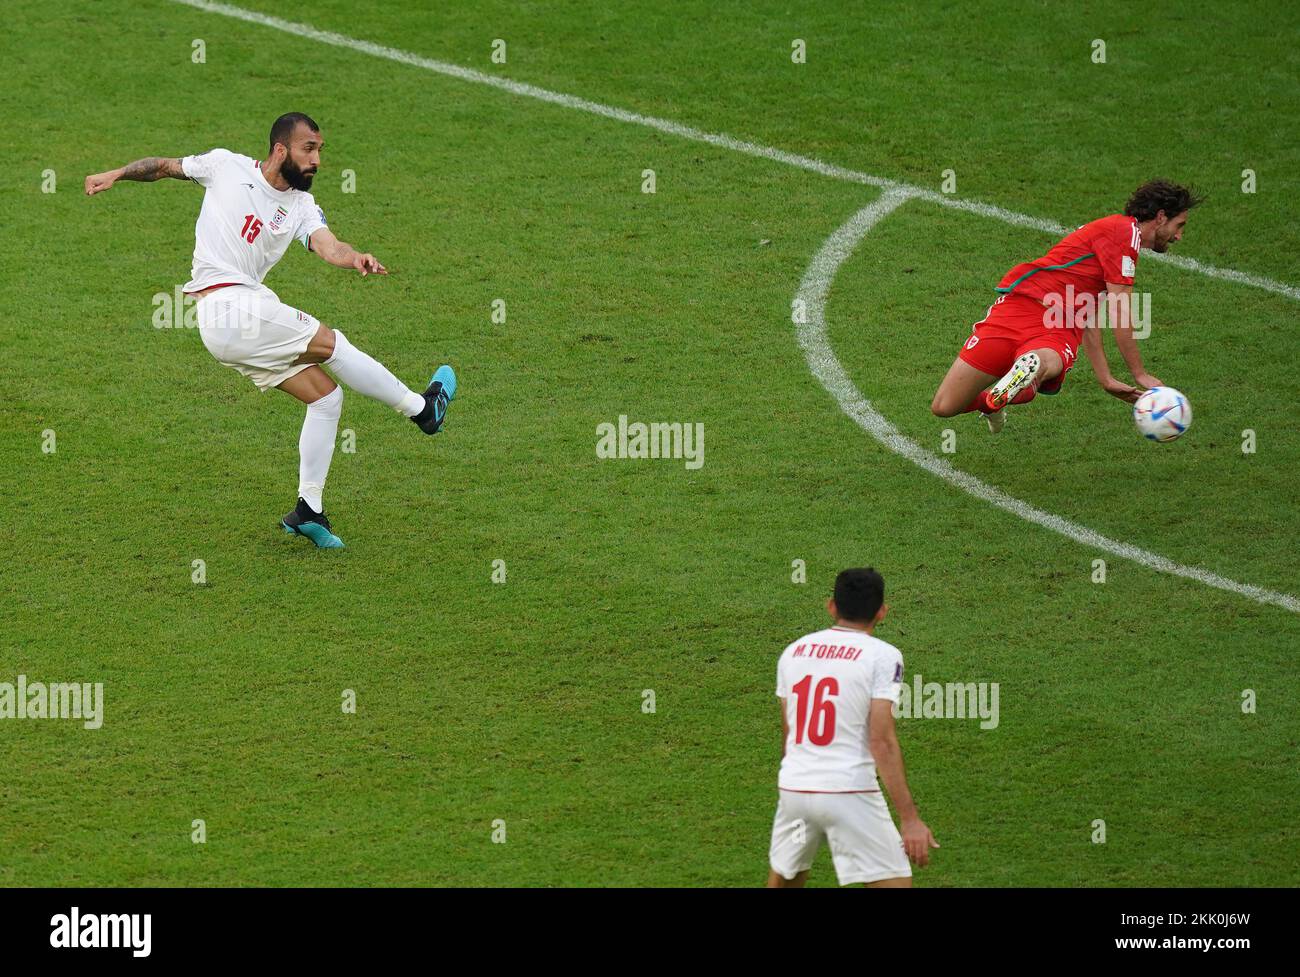 Iran's Roozbeh Cheshmi scores the opening goal during the FIFA World Cup Group B match at the Ahmad Bin Ali Stadium, Al-Rayyan. Picture date: Friday November 25, 2022. Stock Photo